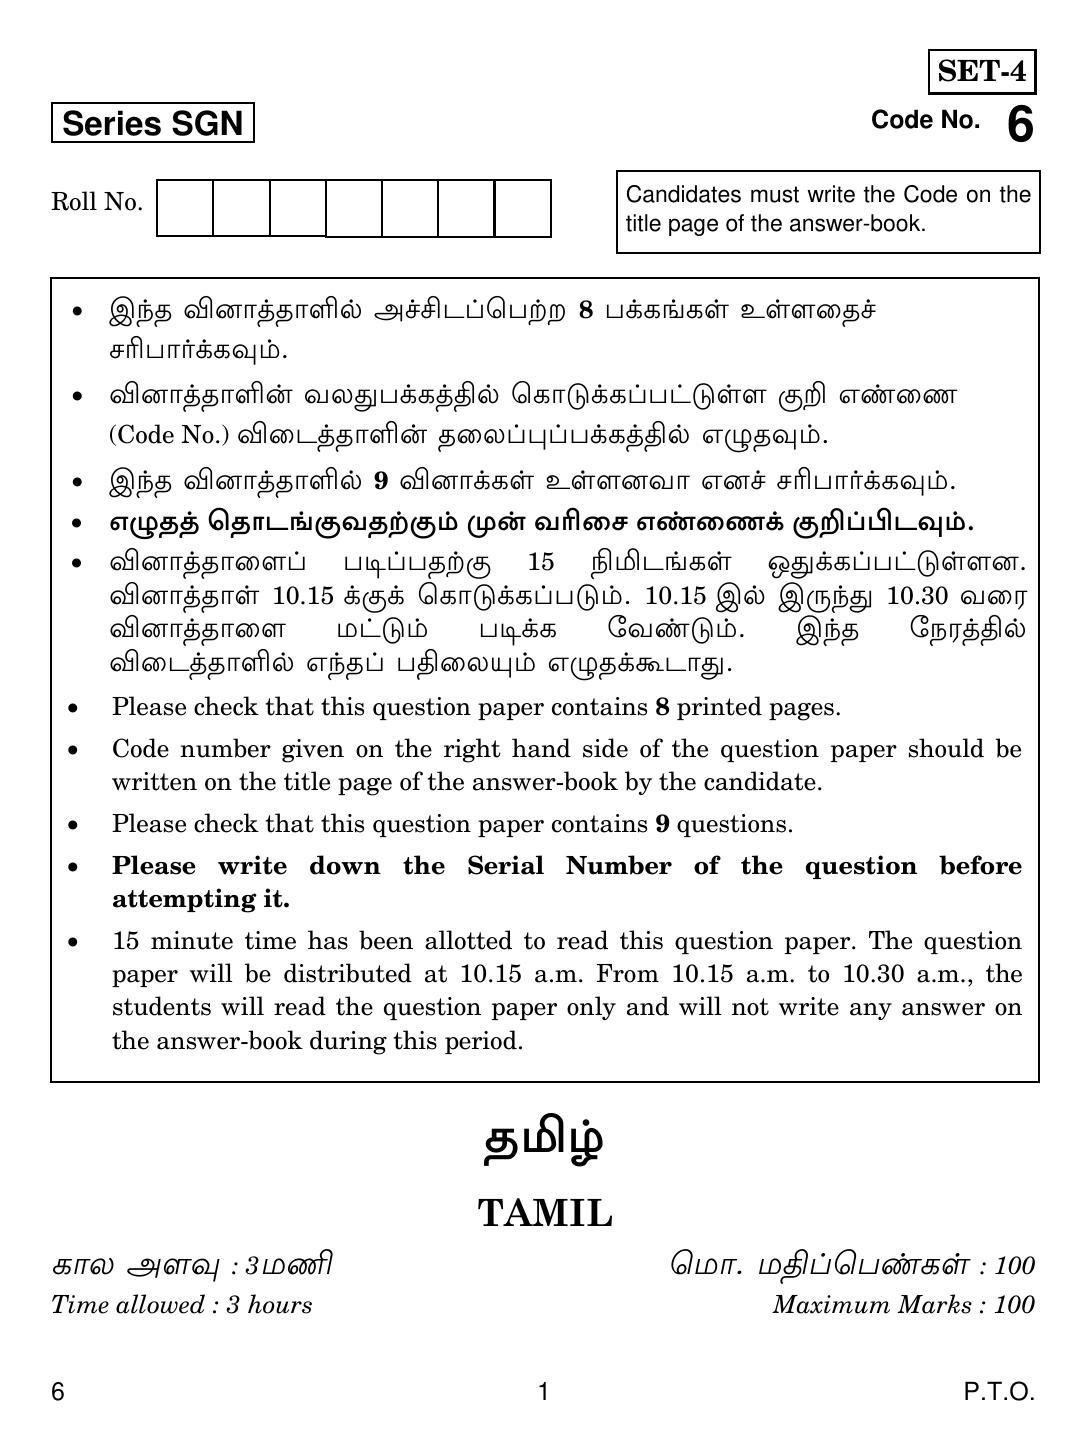 CBSE Class 12 6 Tamil 2018 Question Paper - Page 1